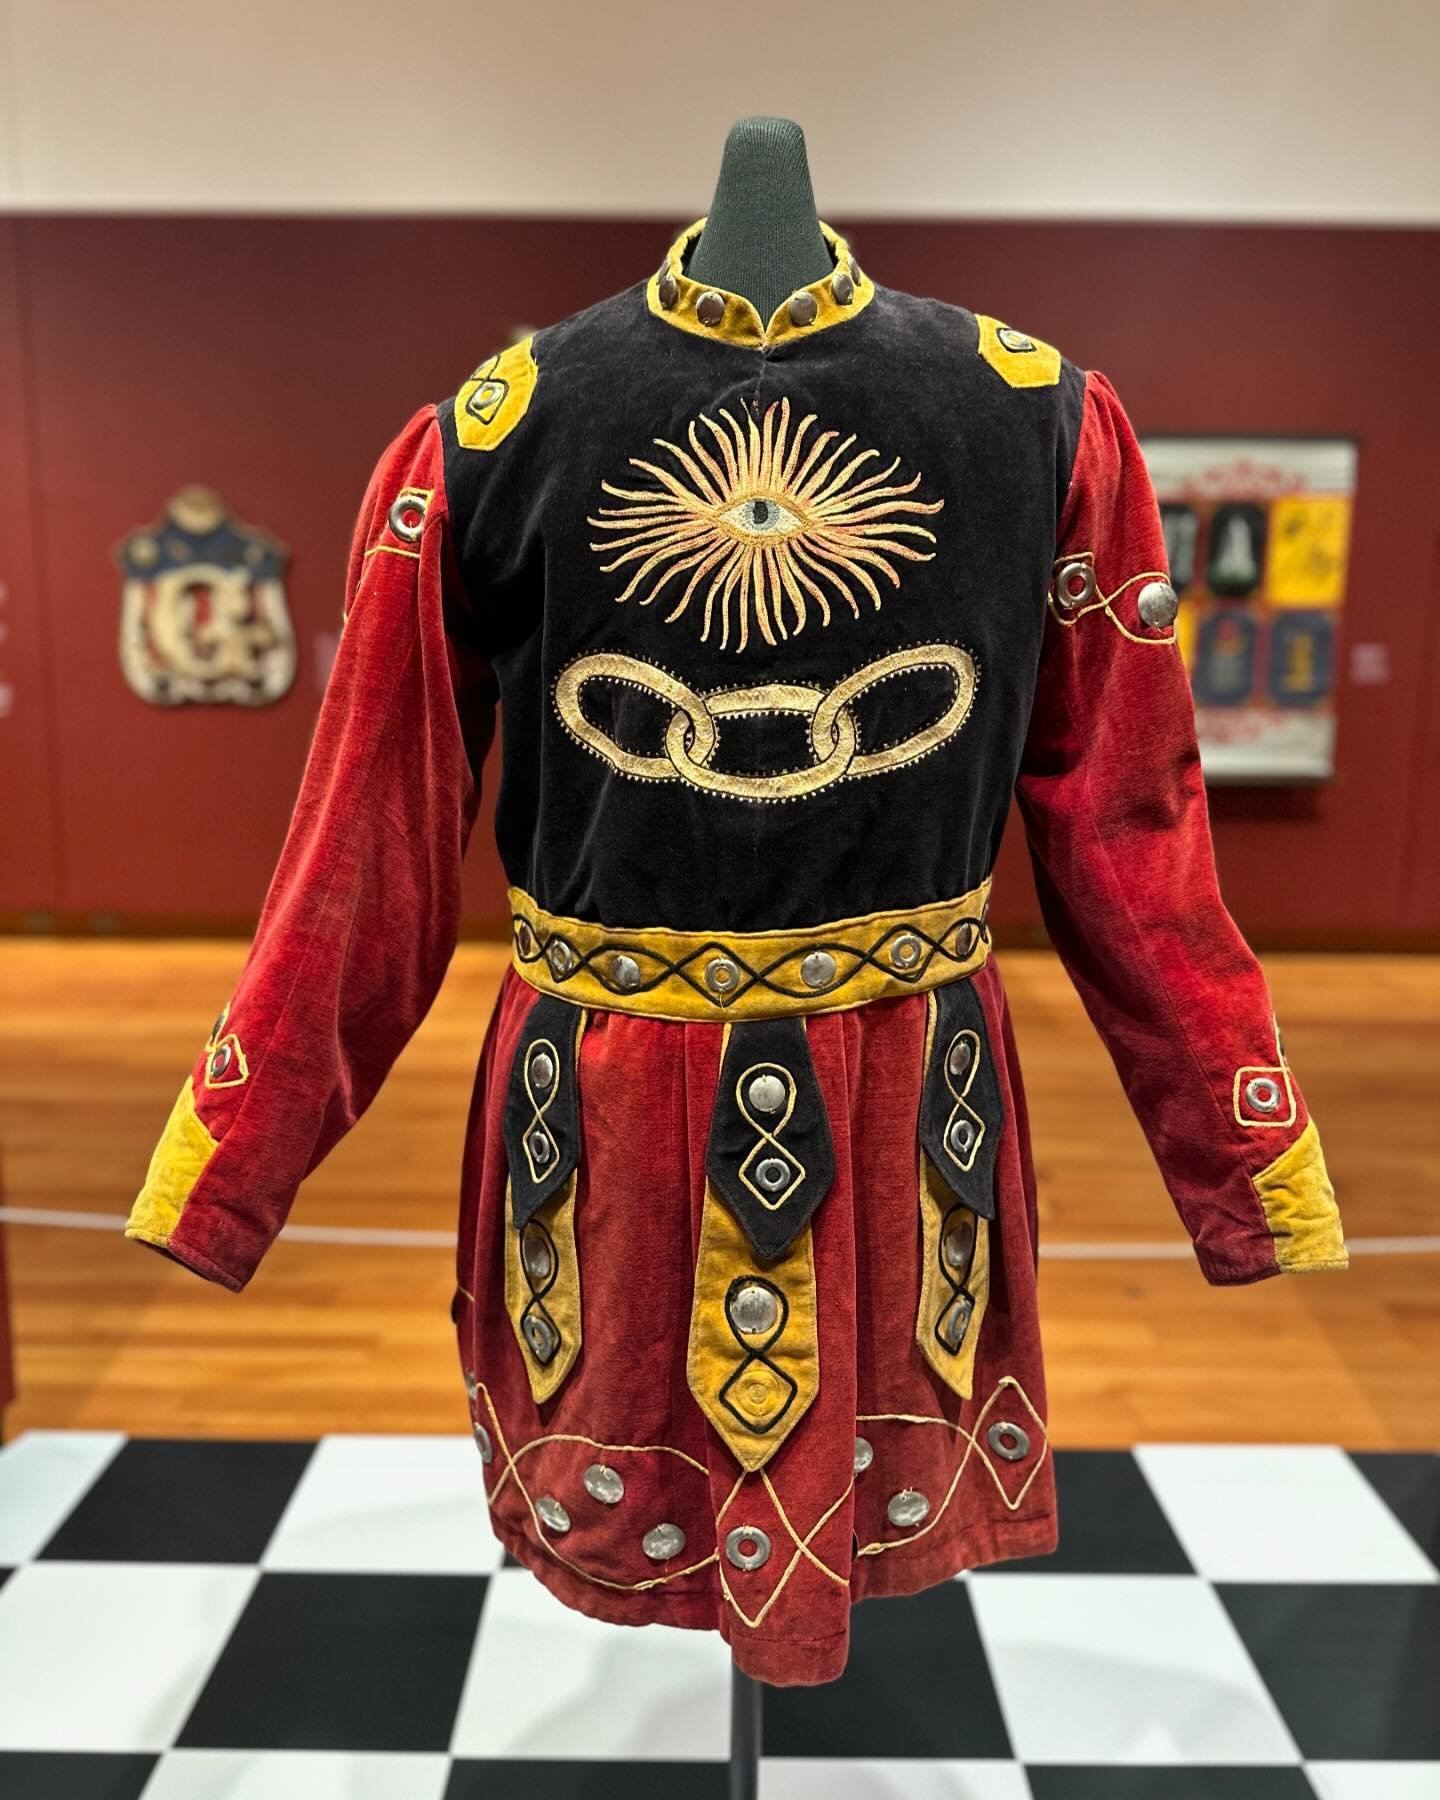 Sunday (May 12th) is the last day to catch the &ldquo;Mystery and Benevolence: Masonic and Odd Fellows Folk Art&rdquo; exhibition at the Historic New Orleans Collection, 520 Royal Street. It is a traveling exhibition curated by American Folk Art Muse